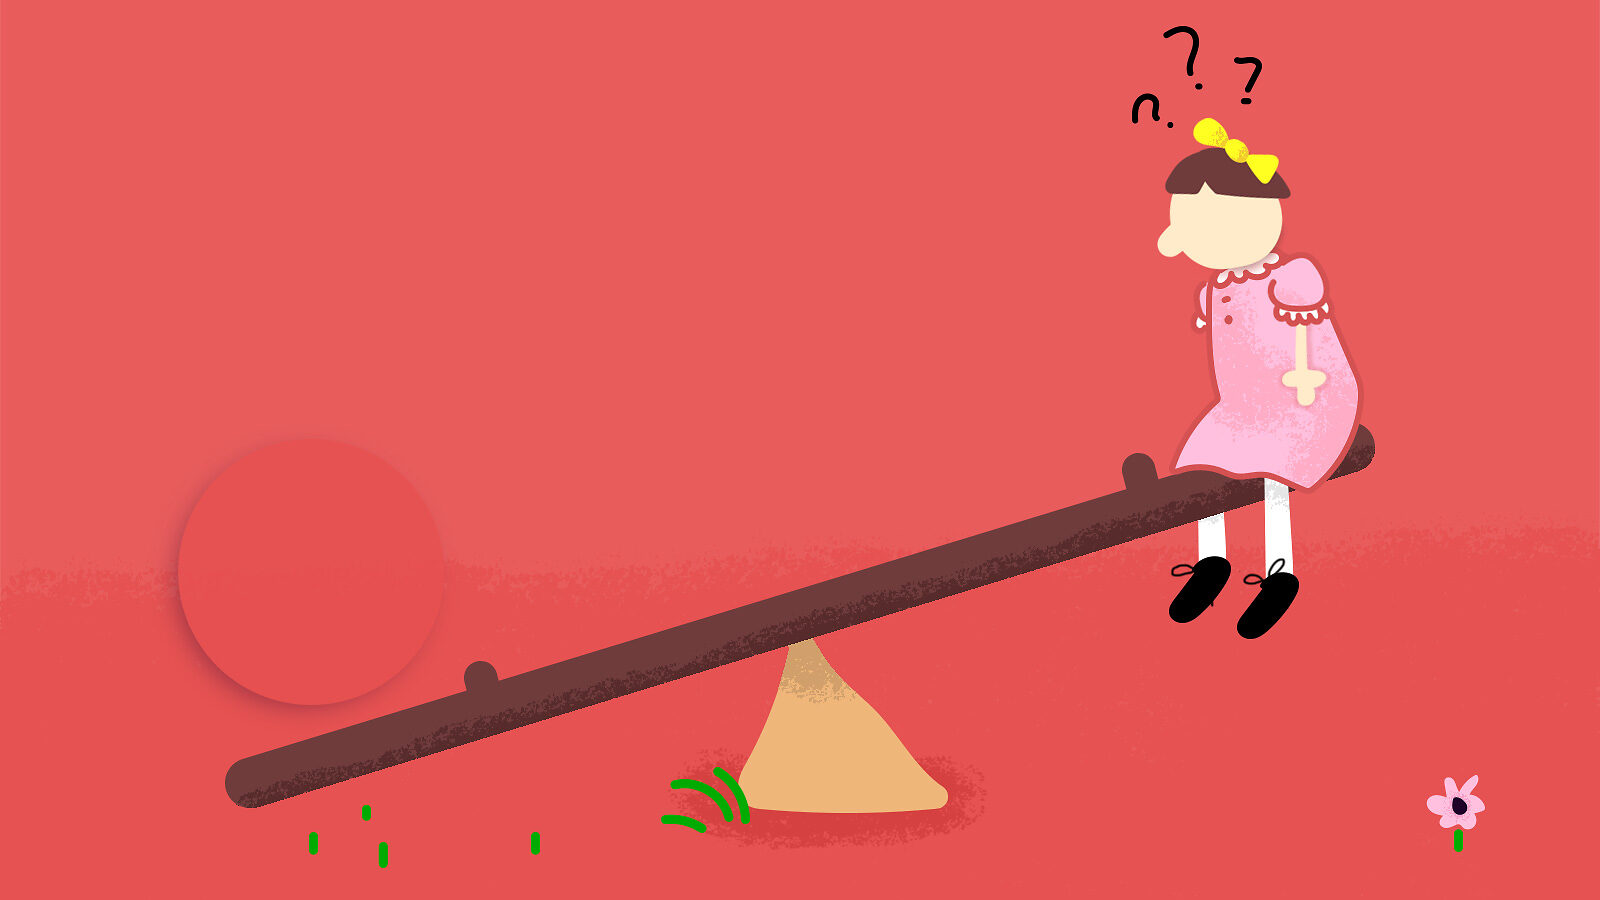 Illustration: a kid is stuck on the top of a teeter-totter with a mysterious object holding the other side